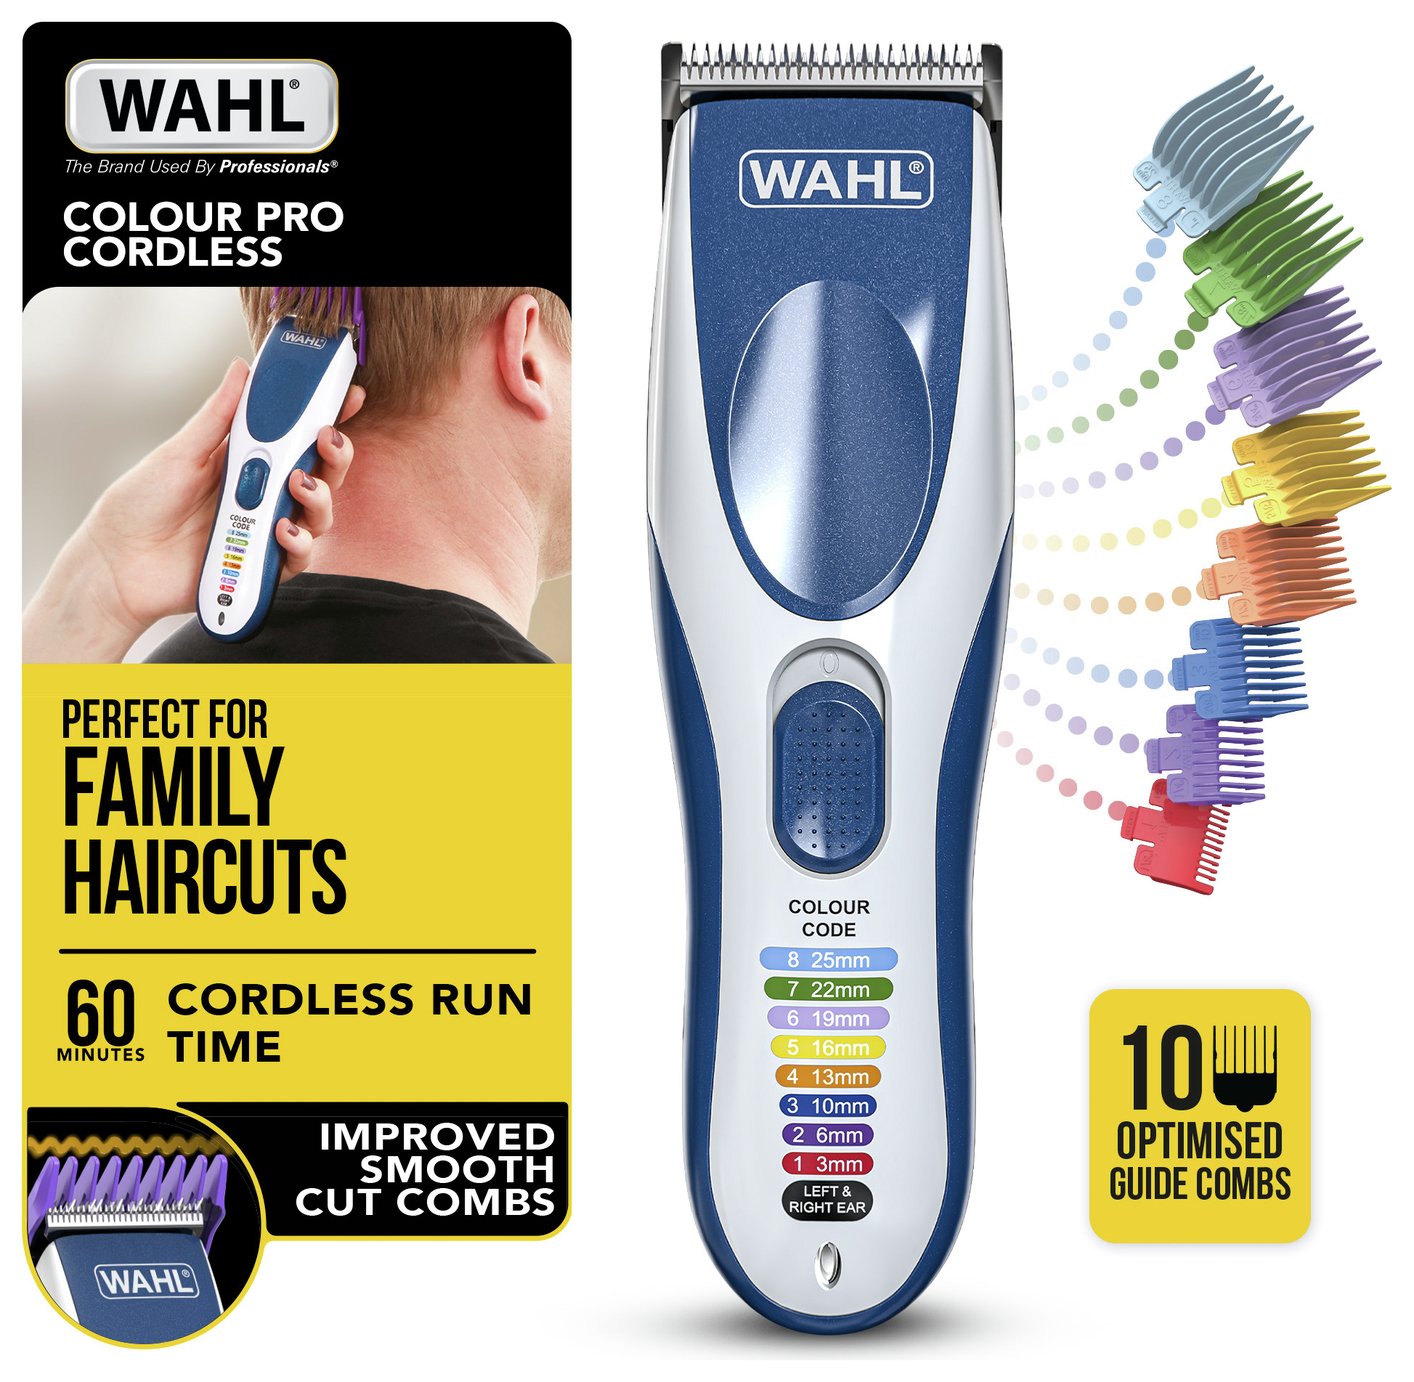 hairdressing clippers argos